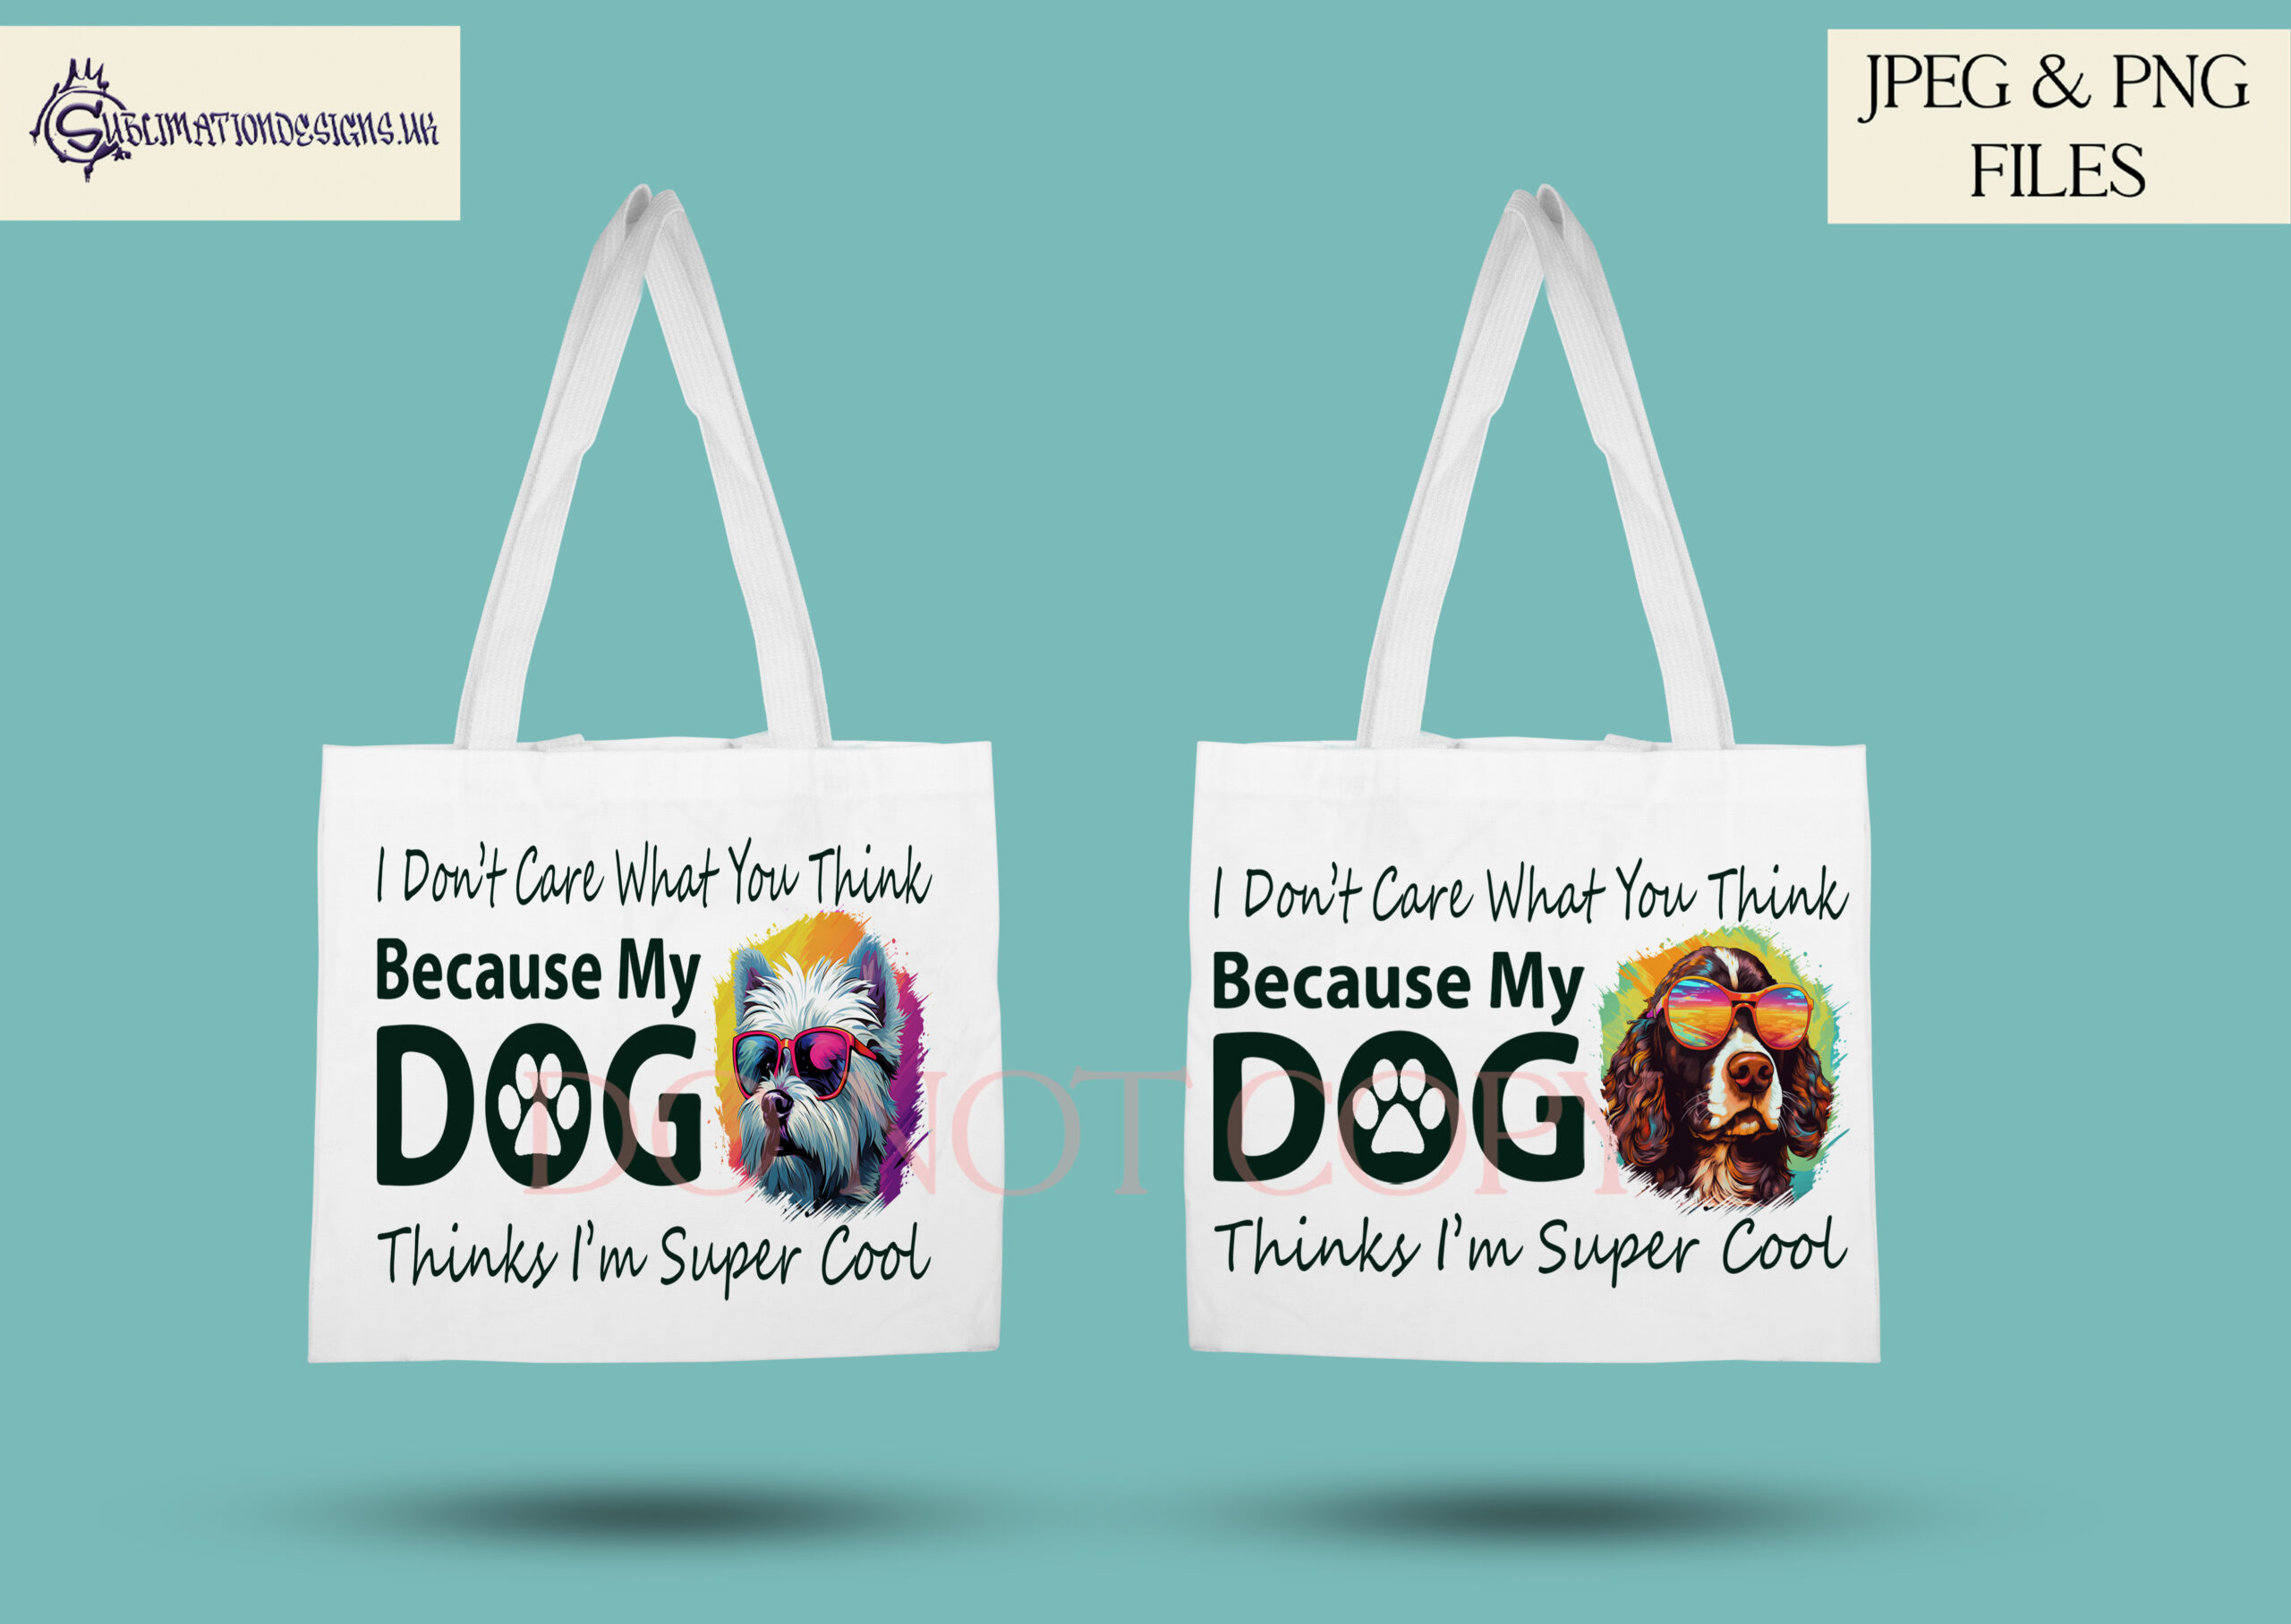 Super Cool Dogs Series 1 with 21 Breeds